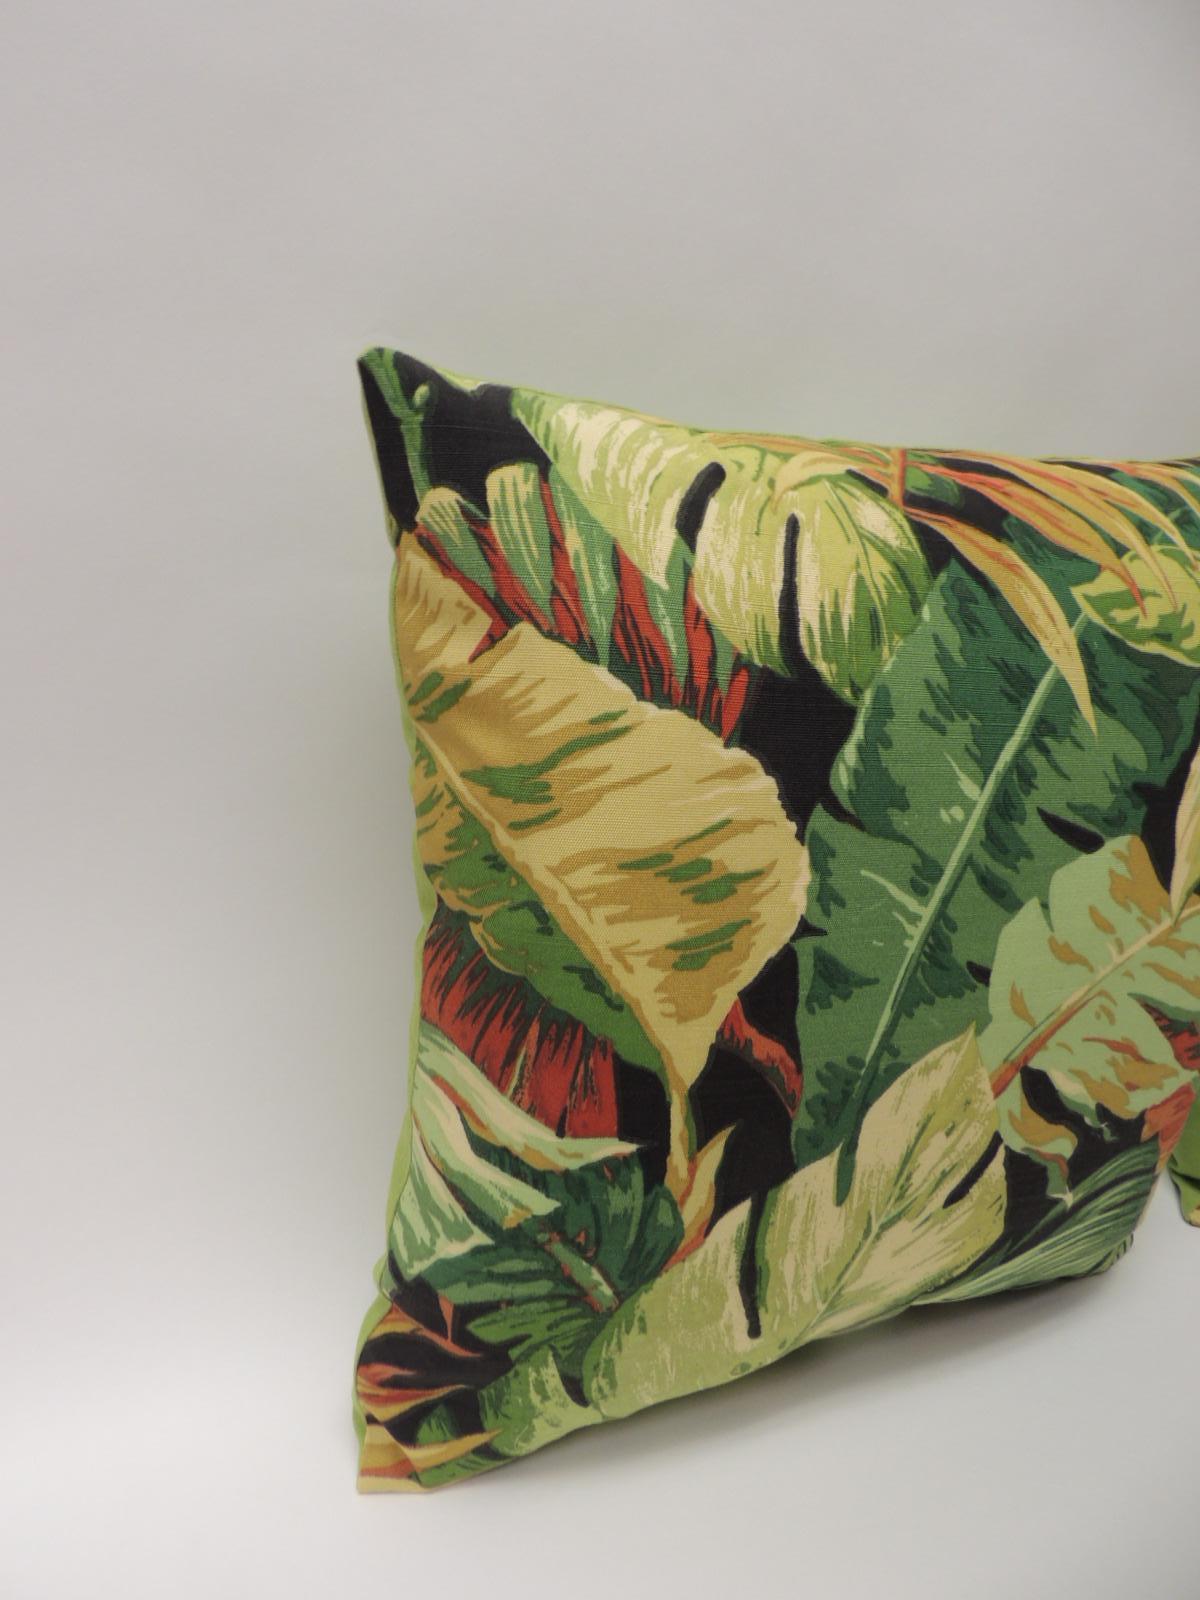 Pair of tropical design printed pillows, in shades of green, orange and black. Acid green backings. Palm beach Boho-chic. Throw pillows handcrafted and designed in the USA. Closure by stitch (no zipper closure) with a custom-made pillow